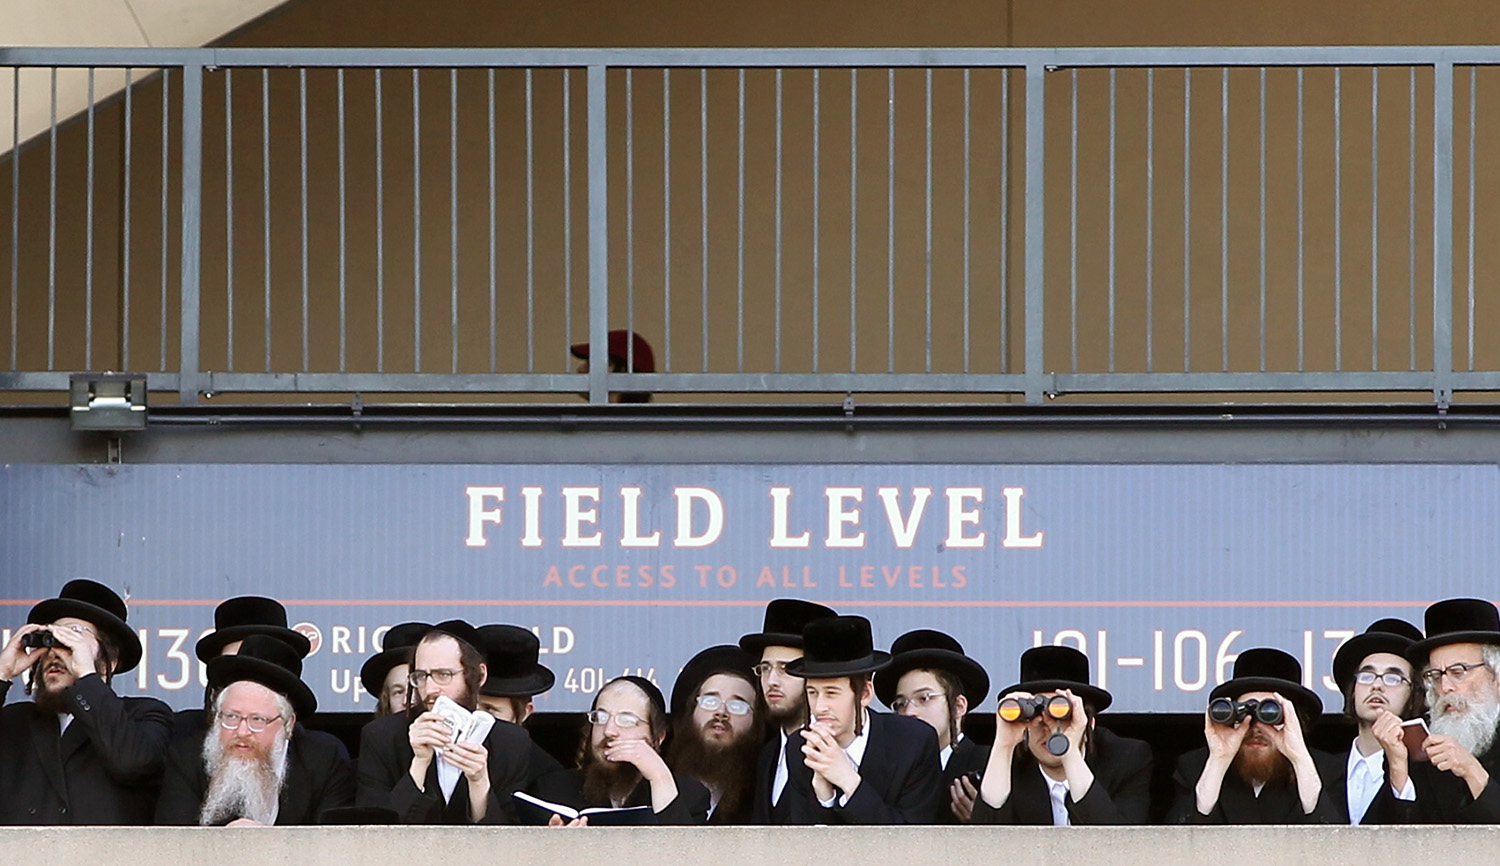 Join Us Live on Wednesday, January 19 to Discuss the Rising Power of Haredi Judaism